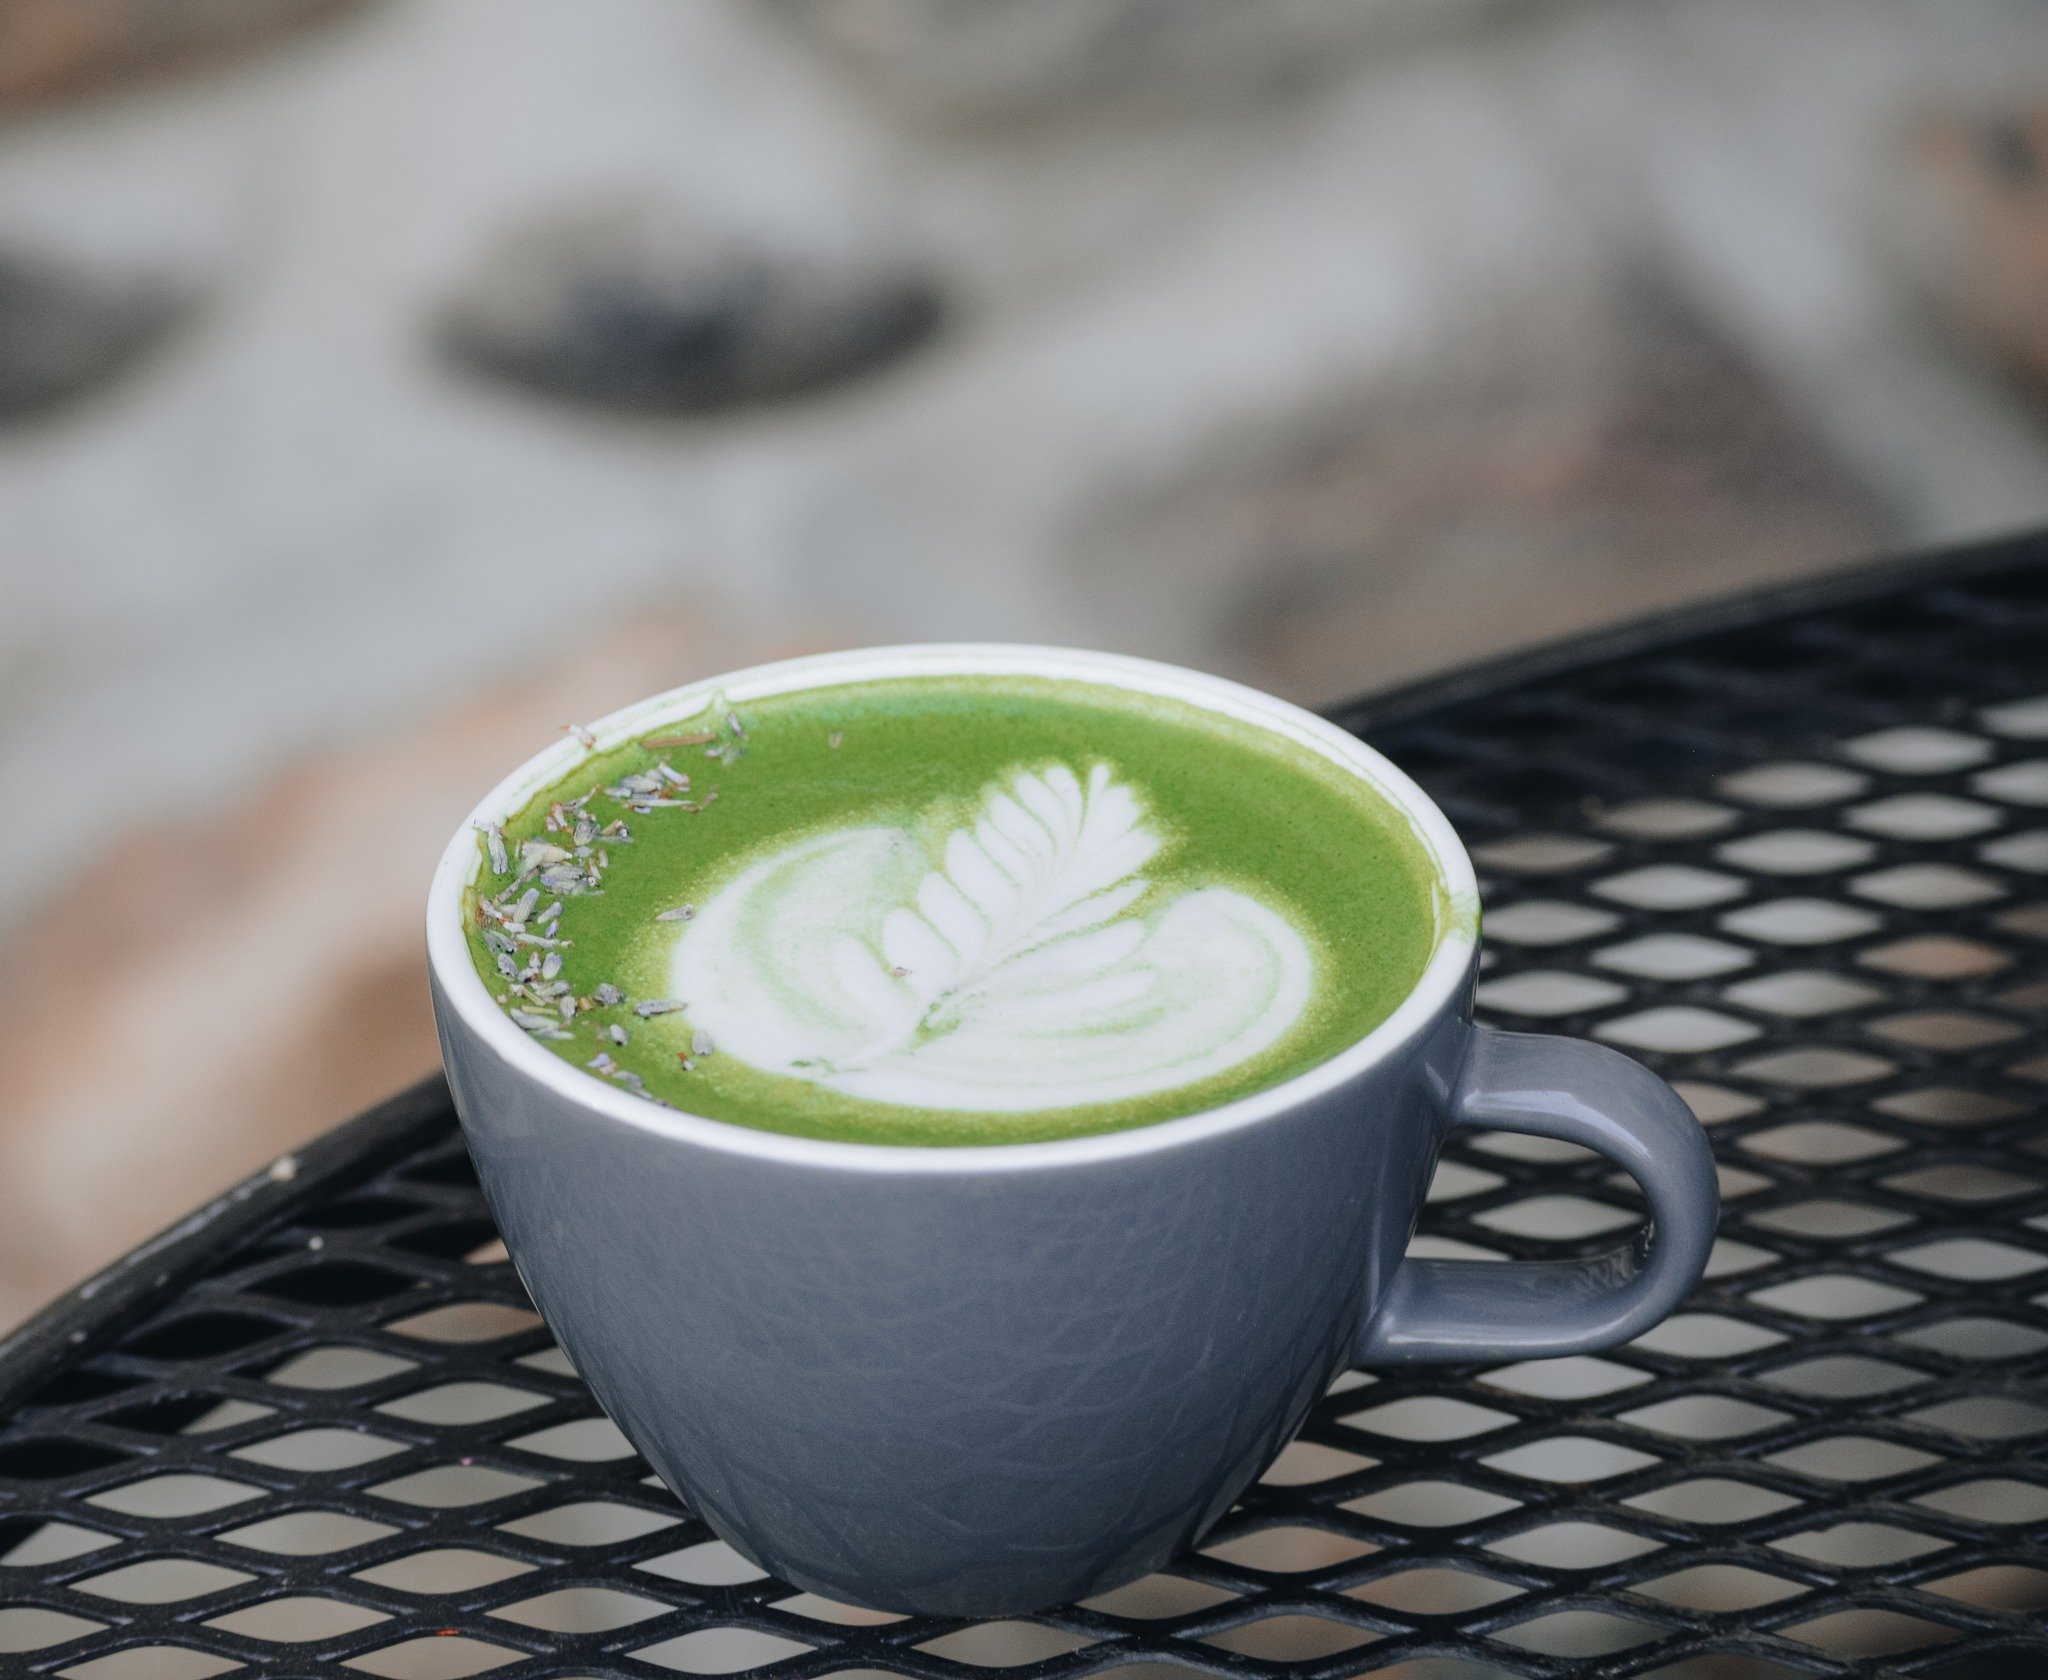 Adding a little lavender to your latte? A Matcha made in heaven! 

#Matcha #MatchaLatte #Lavender #LavenderMatchaLatte #Cafe13 #GoldenCo #GoldenColorado